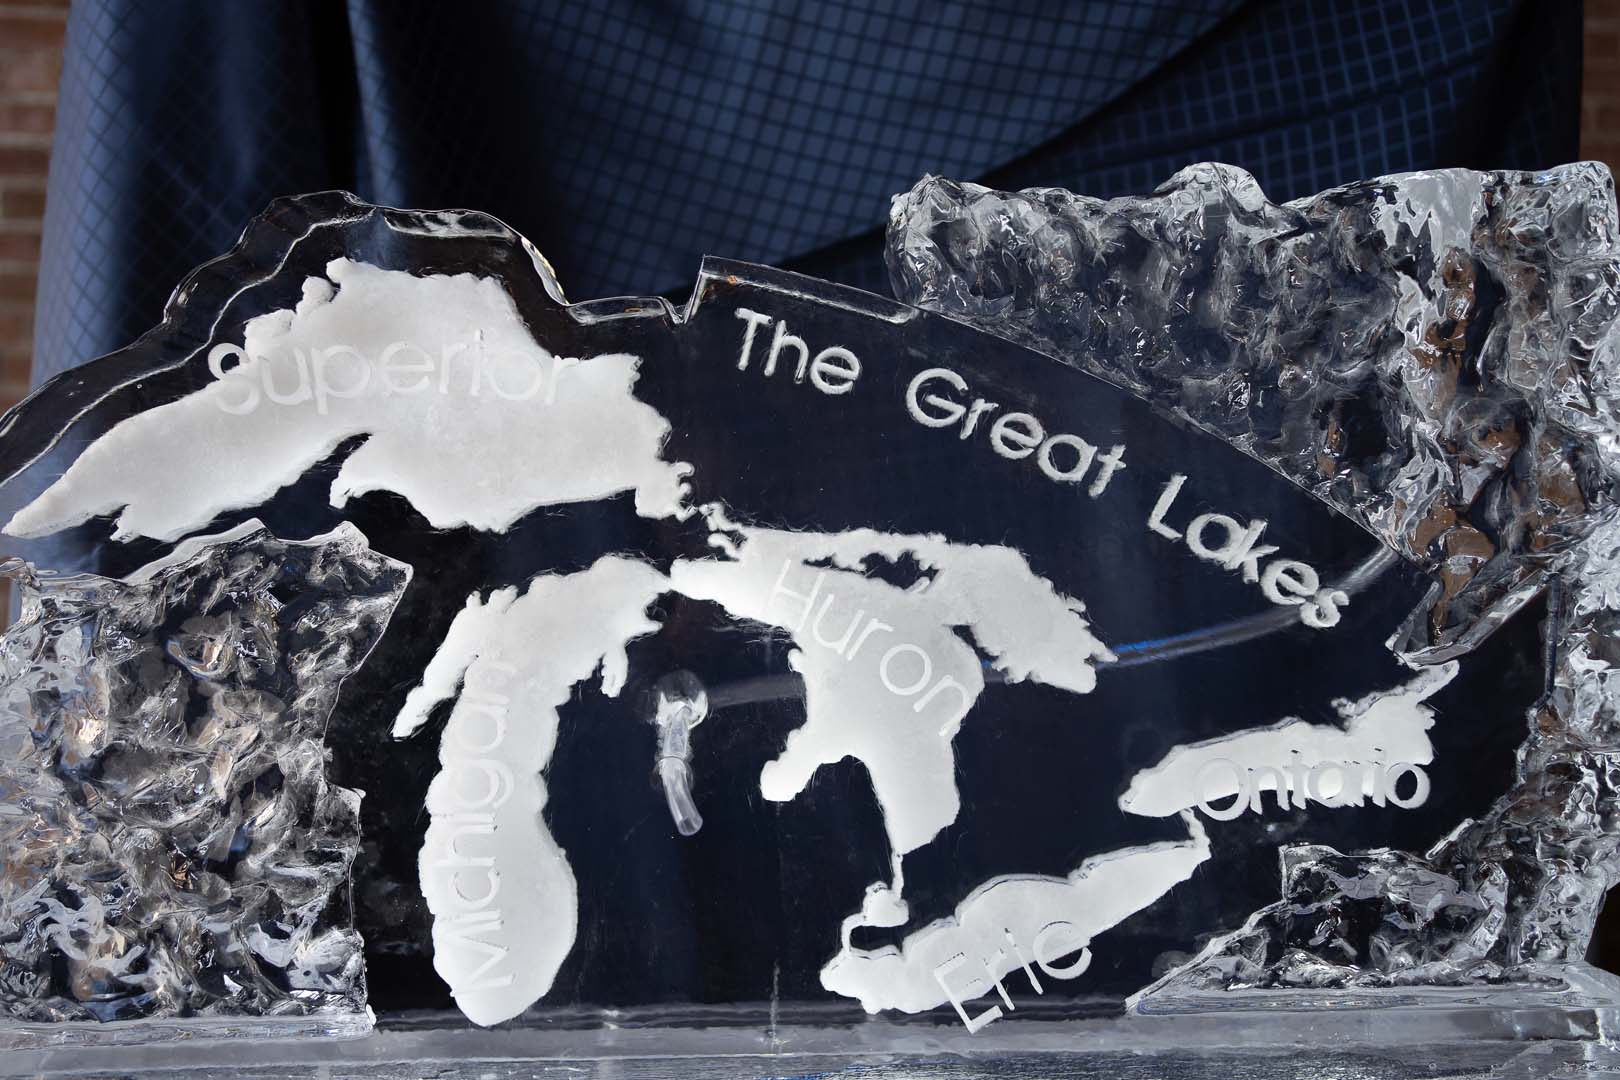 The Great Lakes ice sculpture